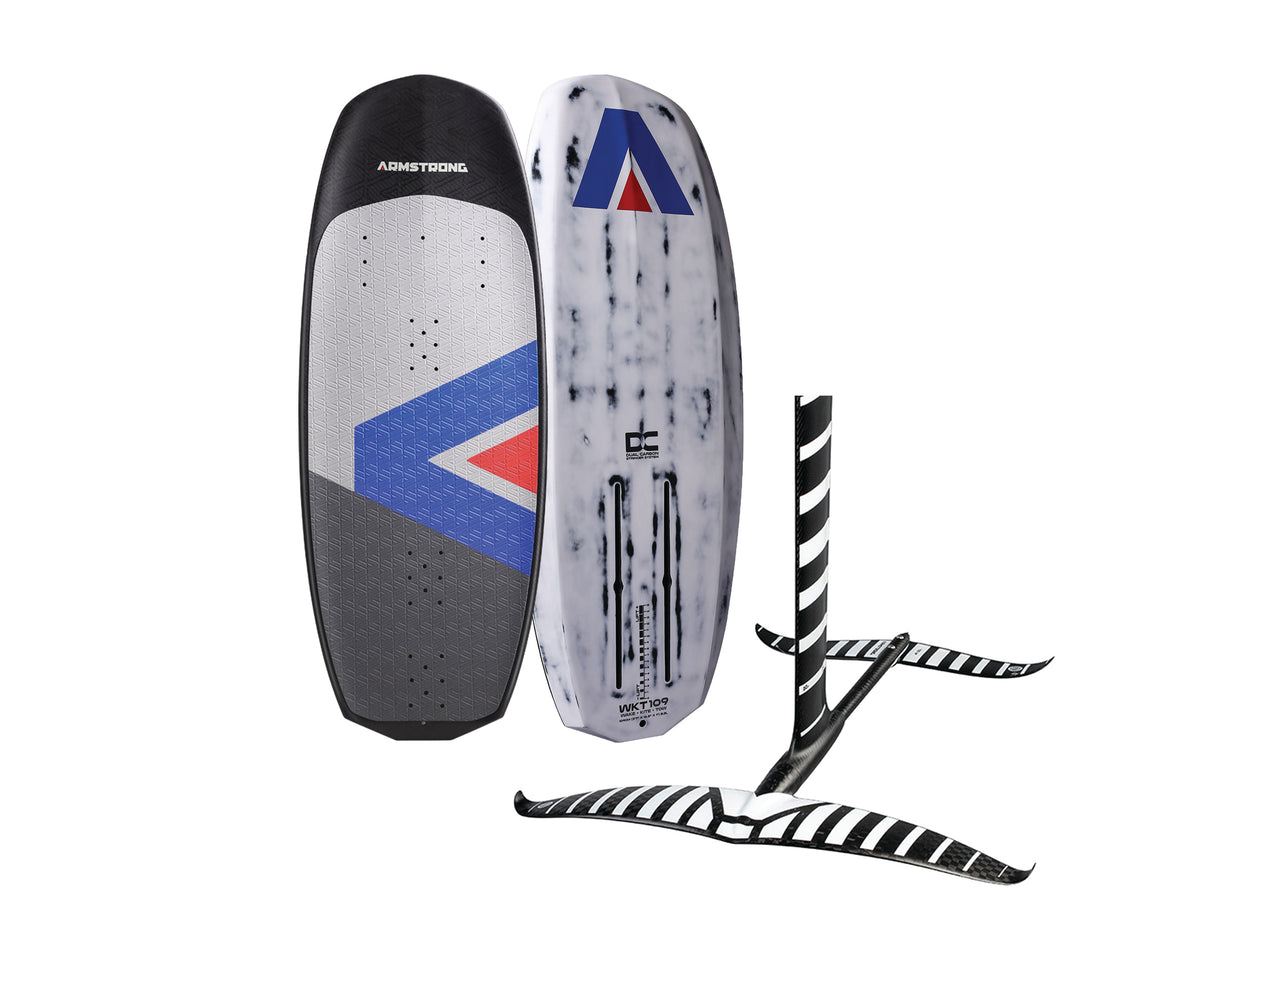 Armstrong Wakefoil Board W/ Armstrong HS625 Foil Kit Package | 2023 | Pre-Order